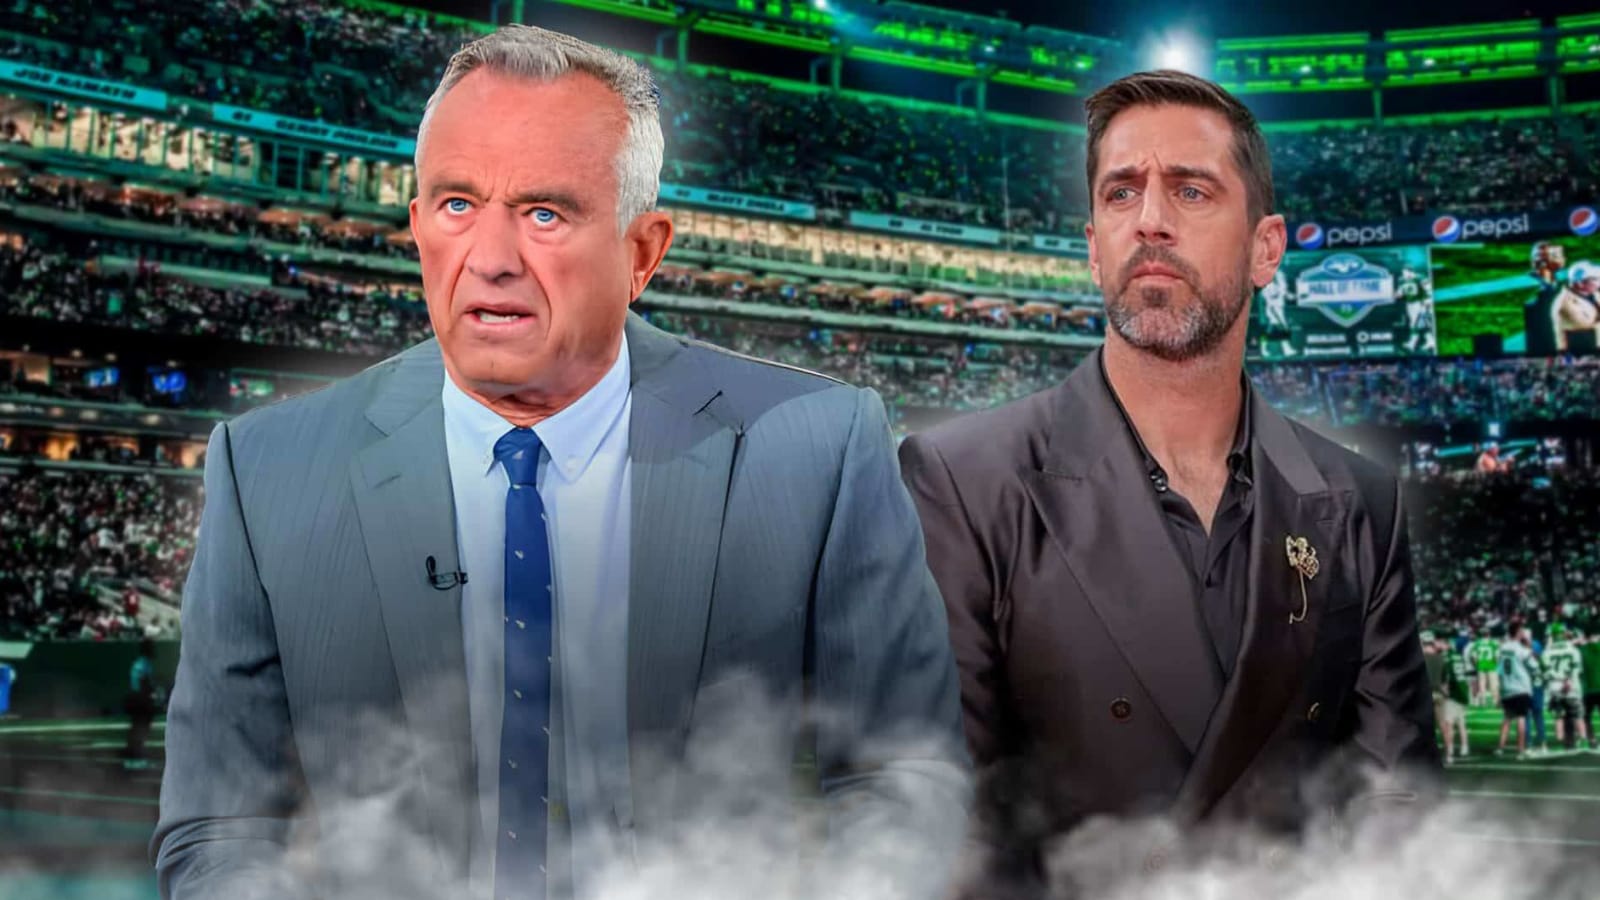 Why Jets’ Aaron Rodgers turned down Robert Kennedy Jr. VP position